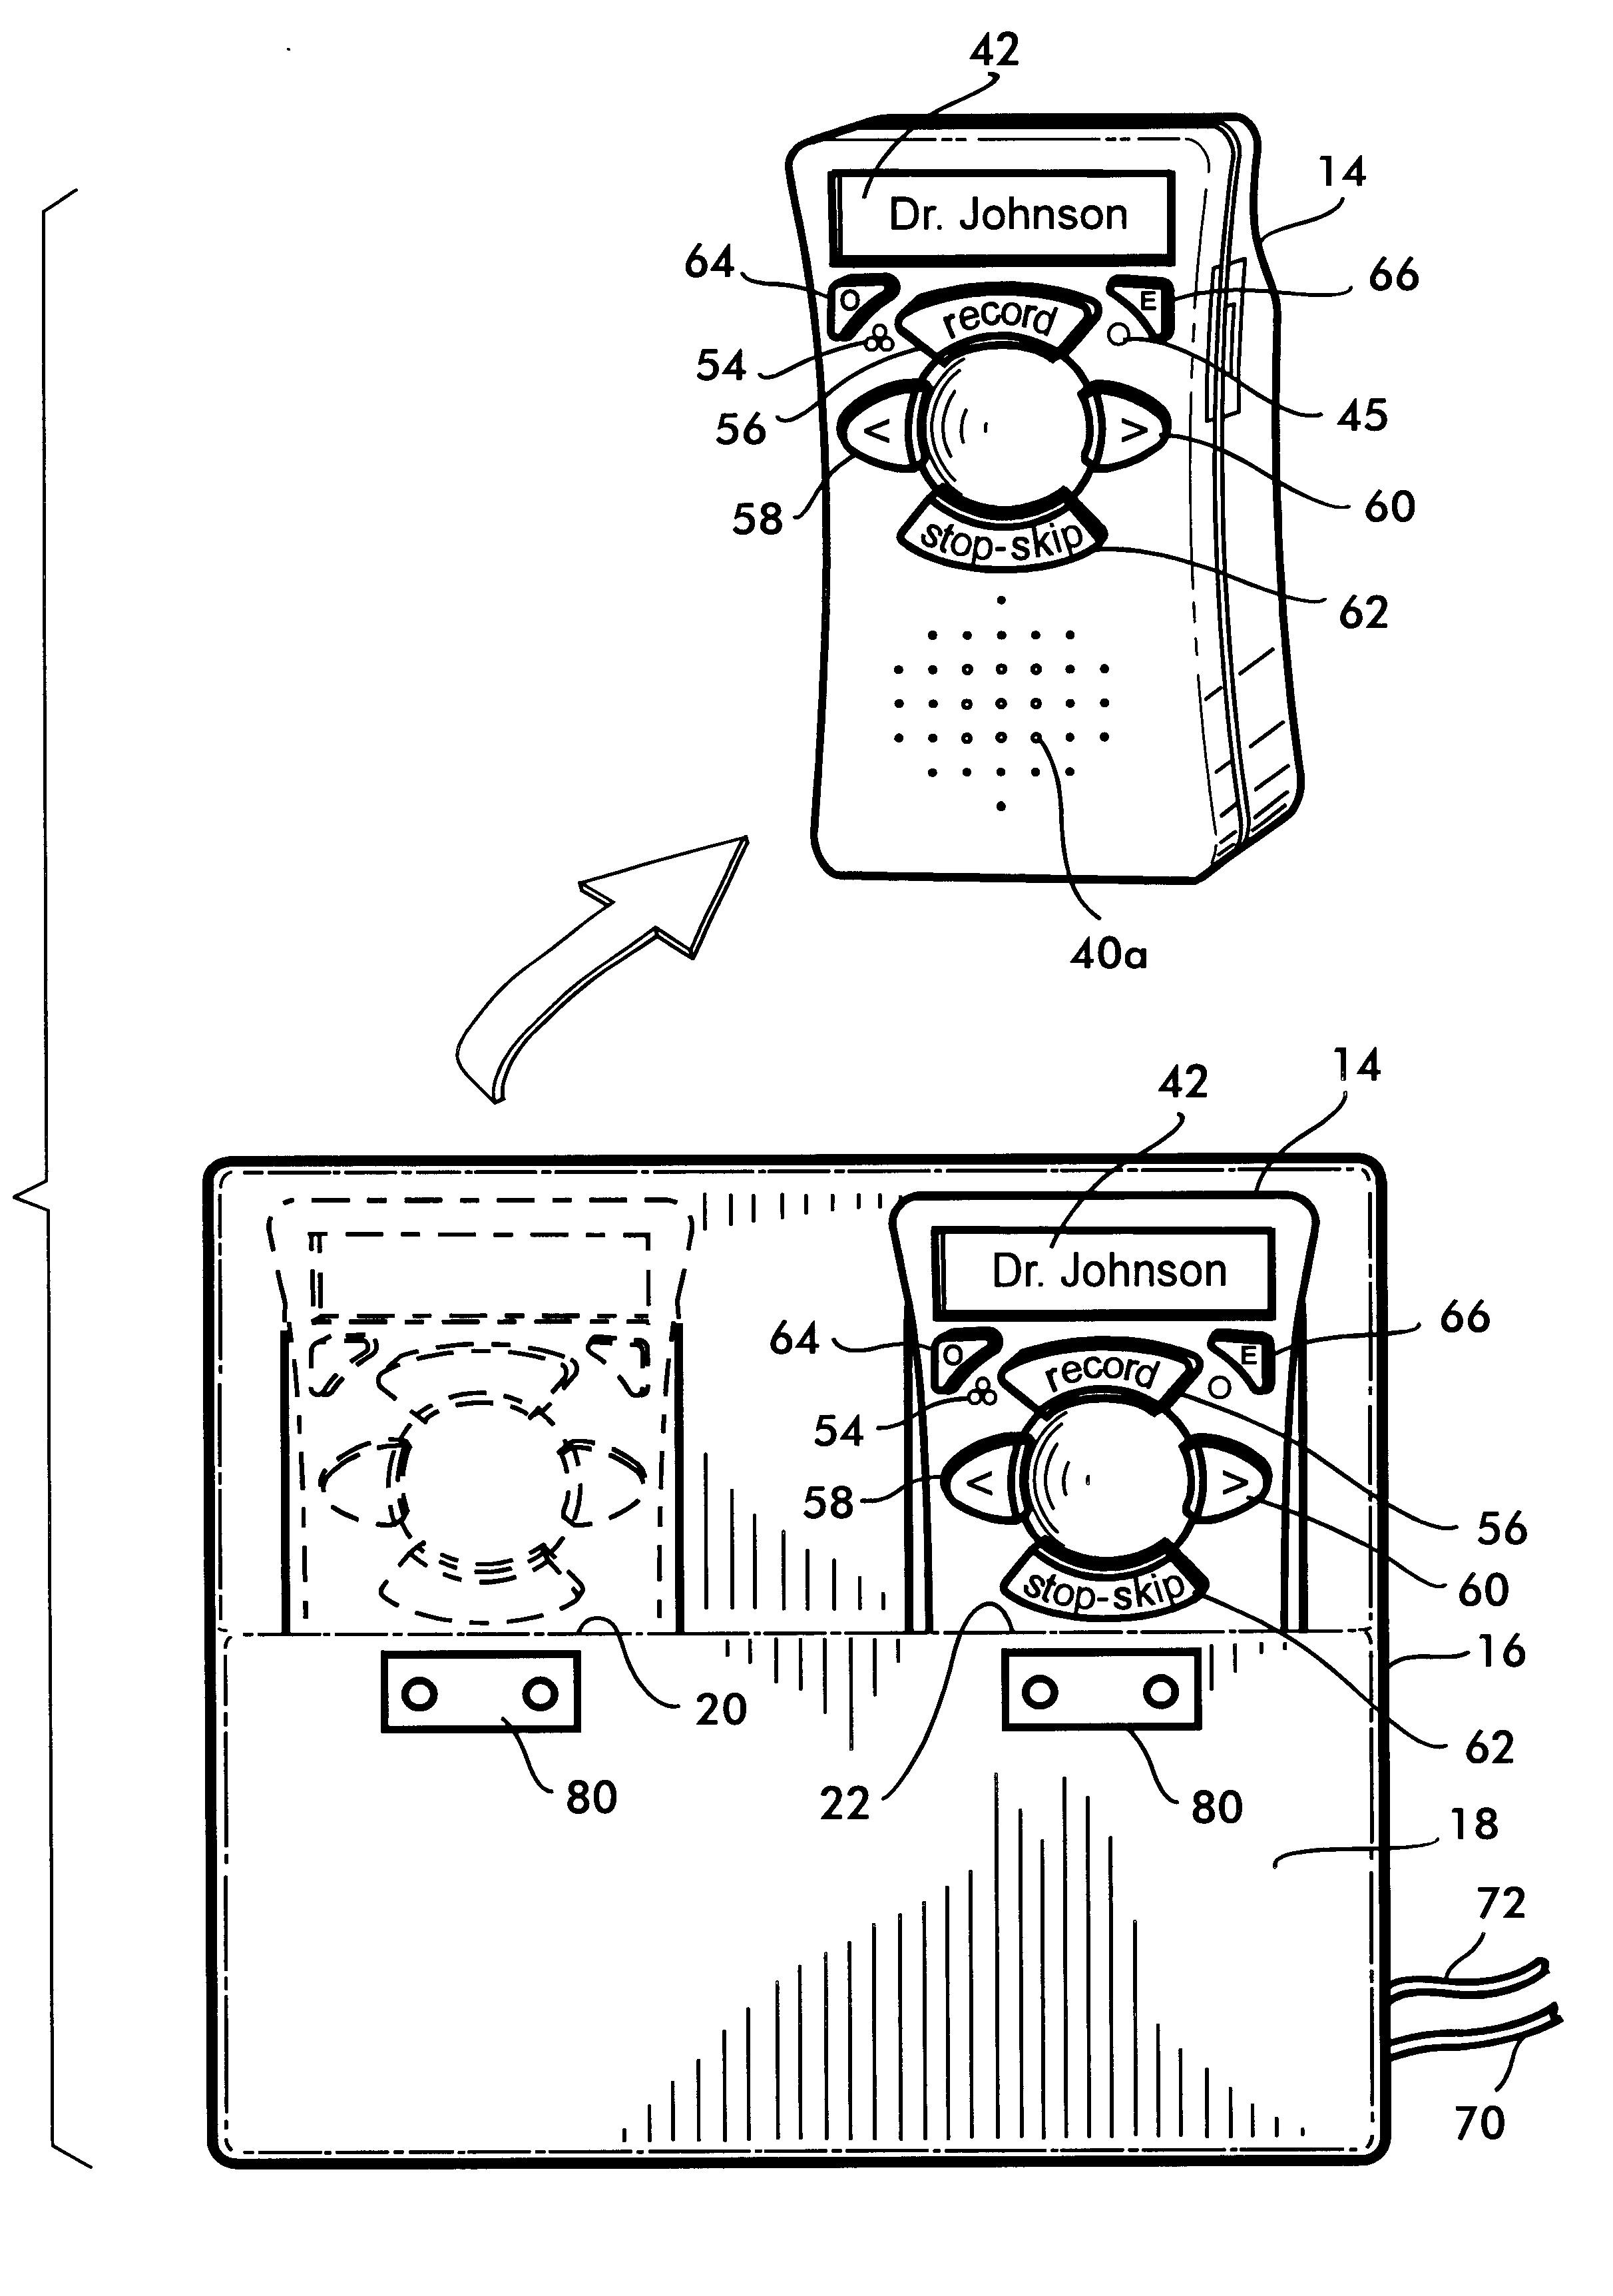 Dictation system capable of processing audio information at a remote location